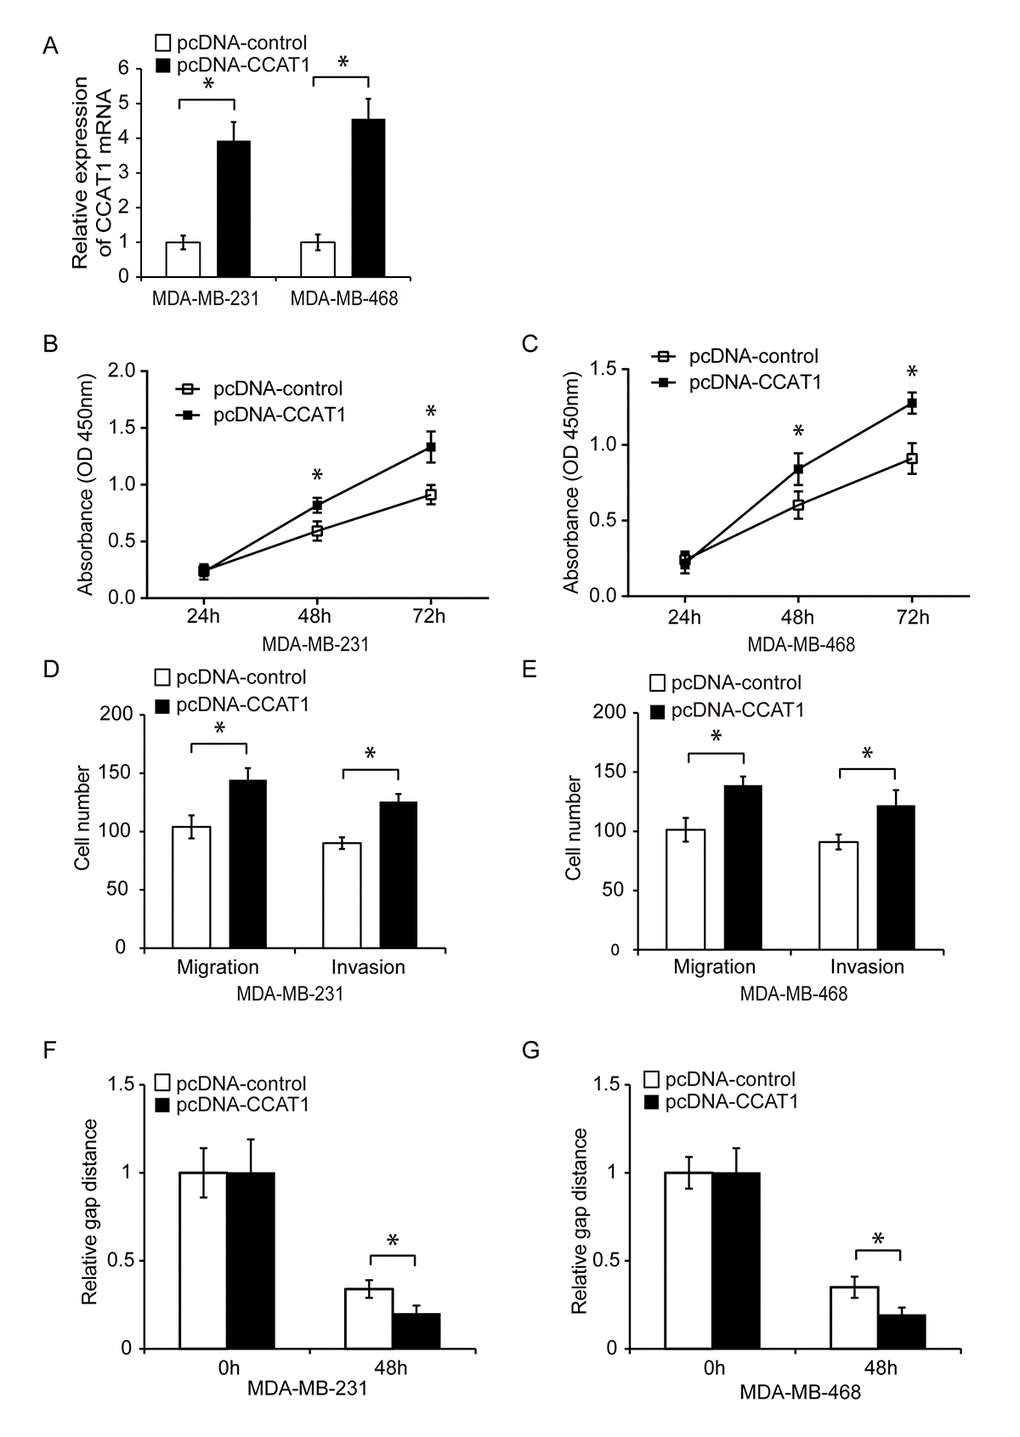 Overexpression of CCAT1 promotes TNBC cell proliferation, migration, and invasion. (A) Quantitative RT-PCR analysis of relative CCAT1 expression in TNBC cells transfected with either pcDNA-CCAT1 or pcDNA-control. (B, C) Analysis of TNBC cell proliferation following transfection with either pcDNA-CCAT1 or pcDNA-control using CCK8 assays. (D, E) Analysis of the migration and invasion capacities of MDA-MB-231 and MDA-MB-468 cells transfected with pcDNA-CCAT1 or pcDNA-control using transwell assays. (F, G) Analysis of the migration capacity of MDA-MB-231 and MDA-MB-468 cells transfected with pcDNA-CCAT1 or pcDNA-control using wound healing assays. *P 